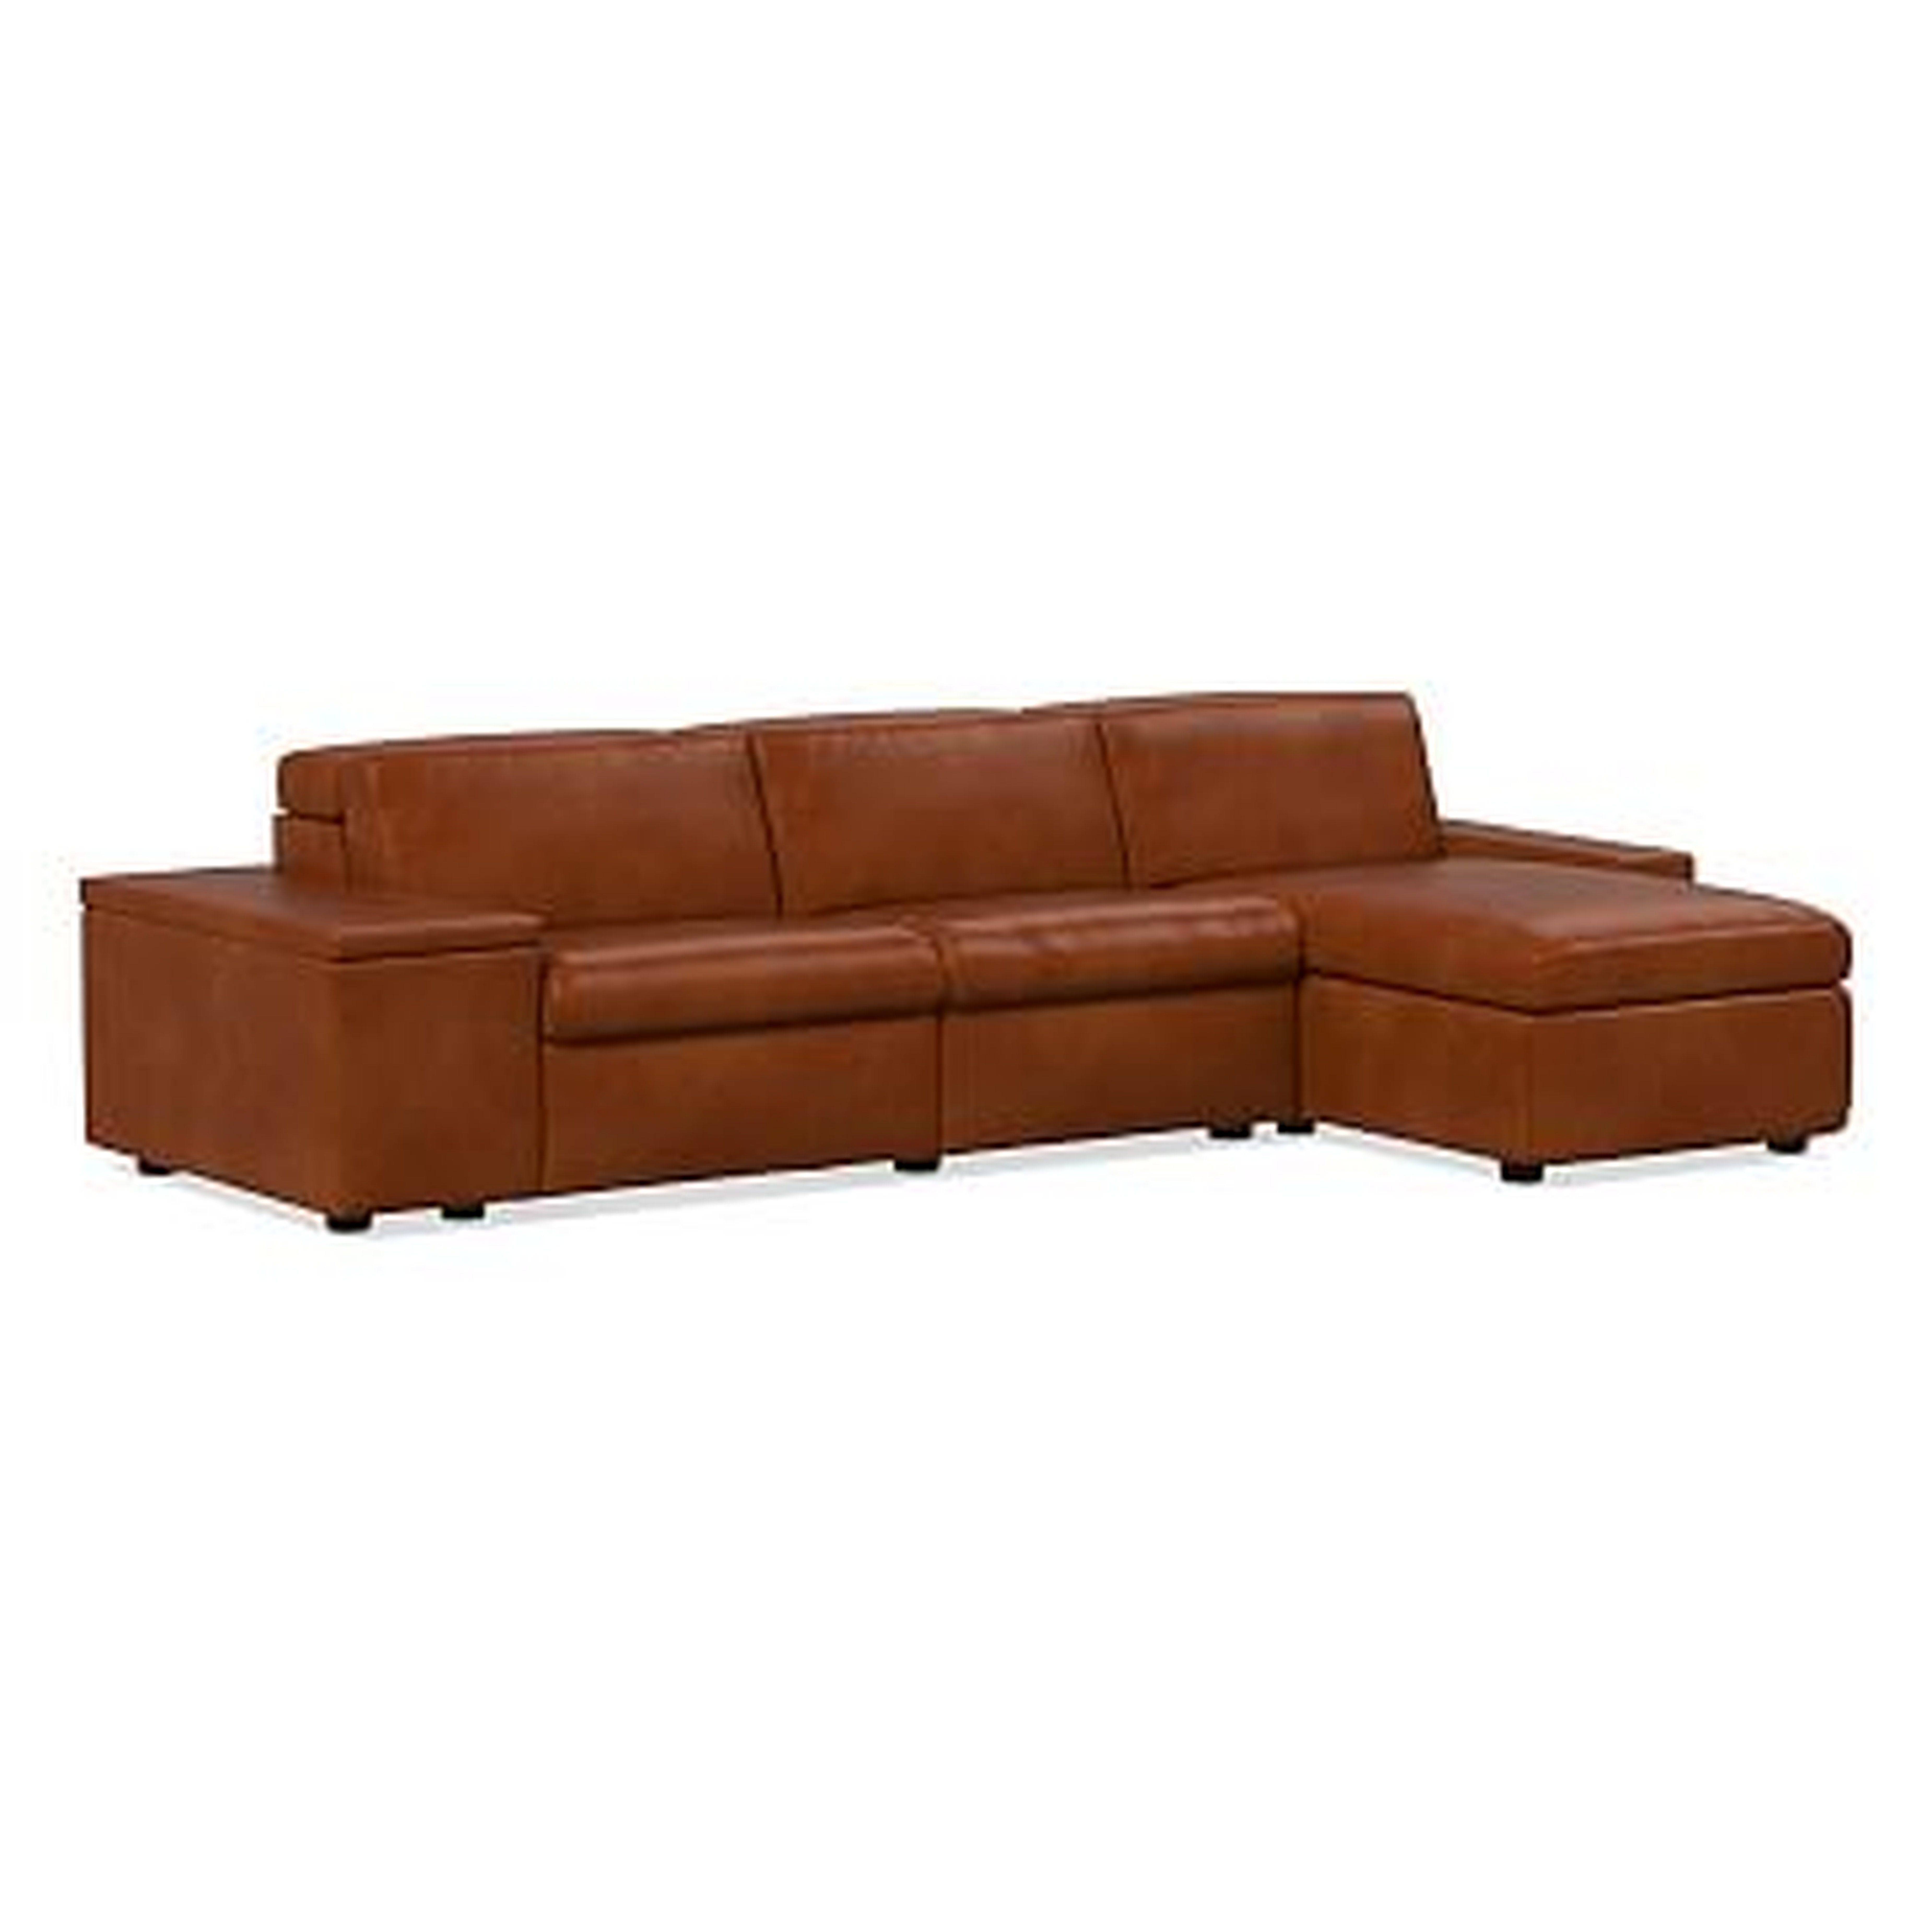 Enzo Sectional Set 35: 16" Arm WithStorage + 30" Single With Power + 30" Single Without Power + 8" Arm + Storage Chaise, Poly, Saddle Leather, Nut, Concealed Supports - West Elm